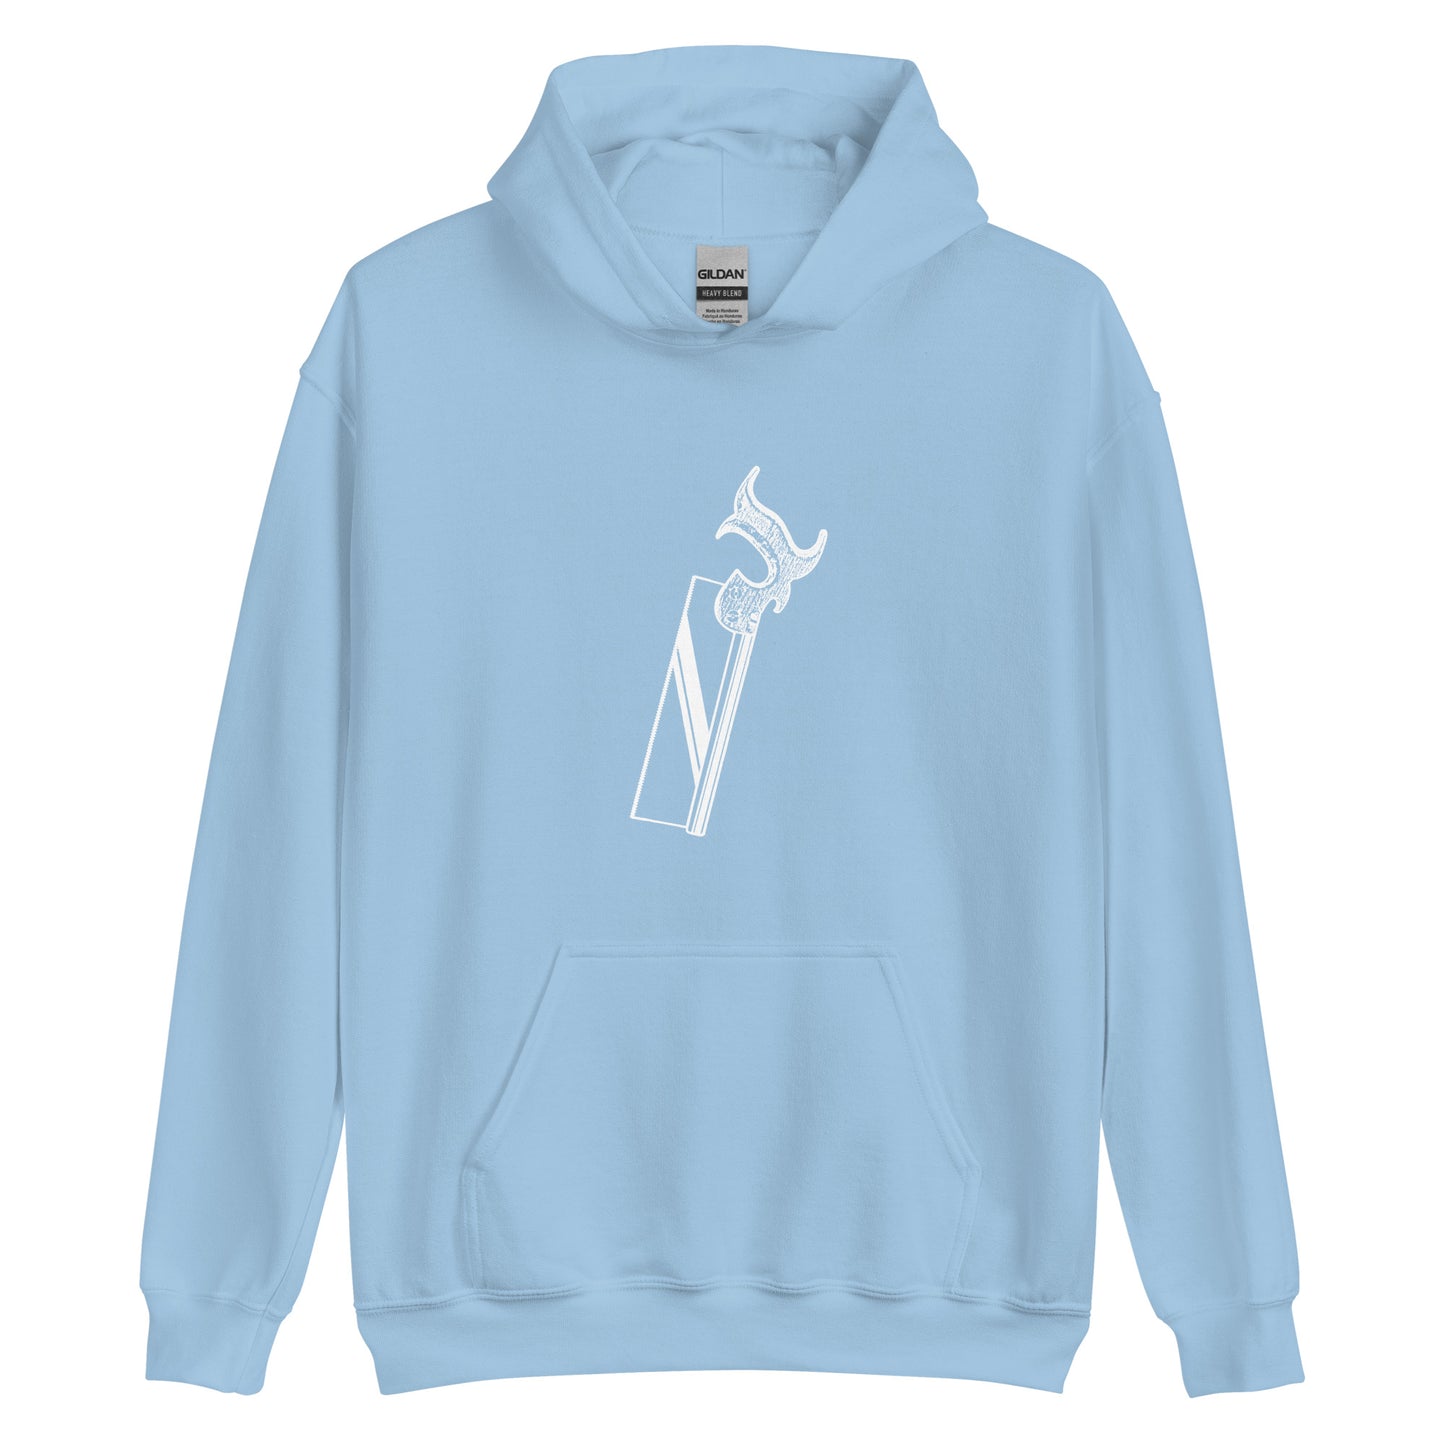 "Dovetail Saw" Unisex Hoodie for Woodworkers (Multiple Colors)